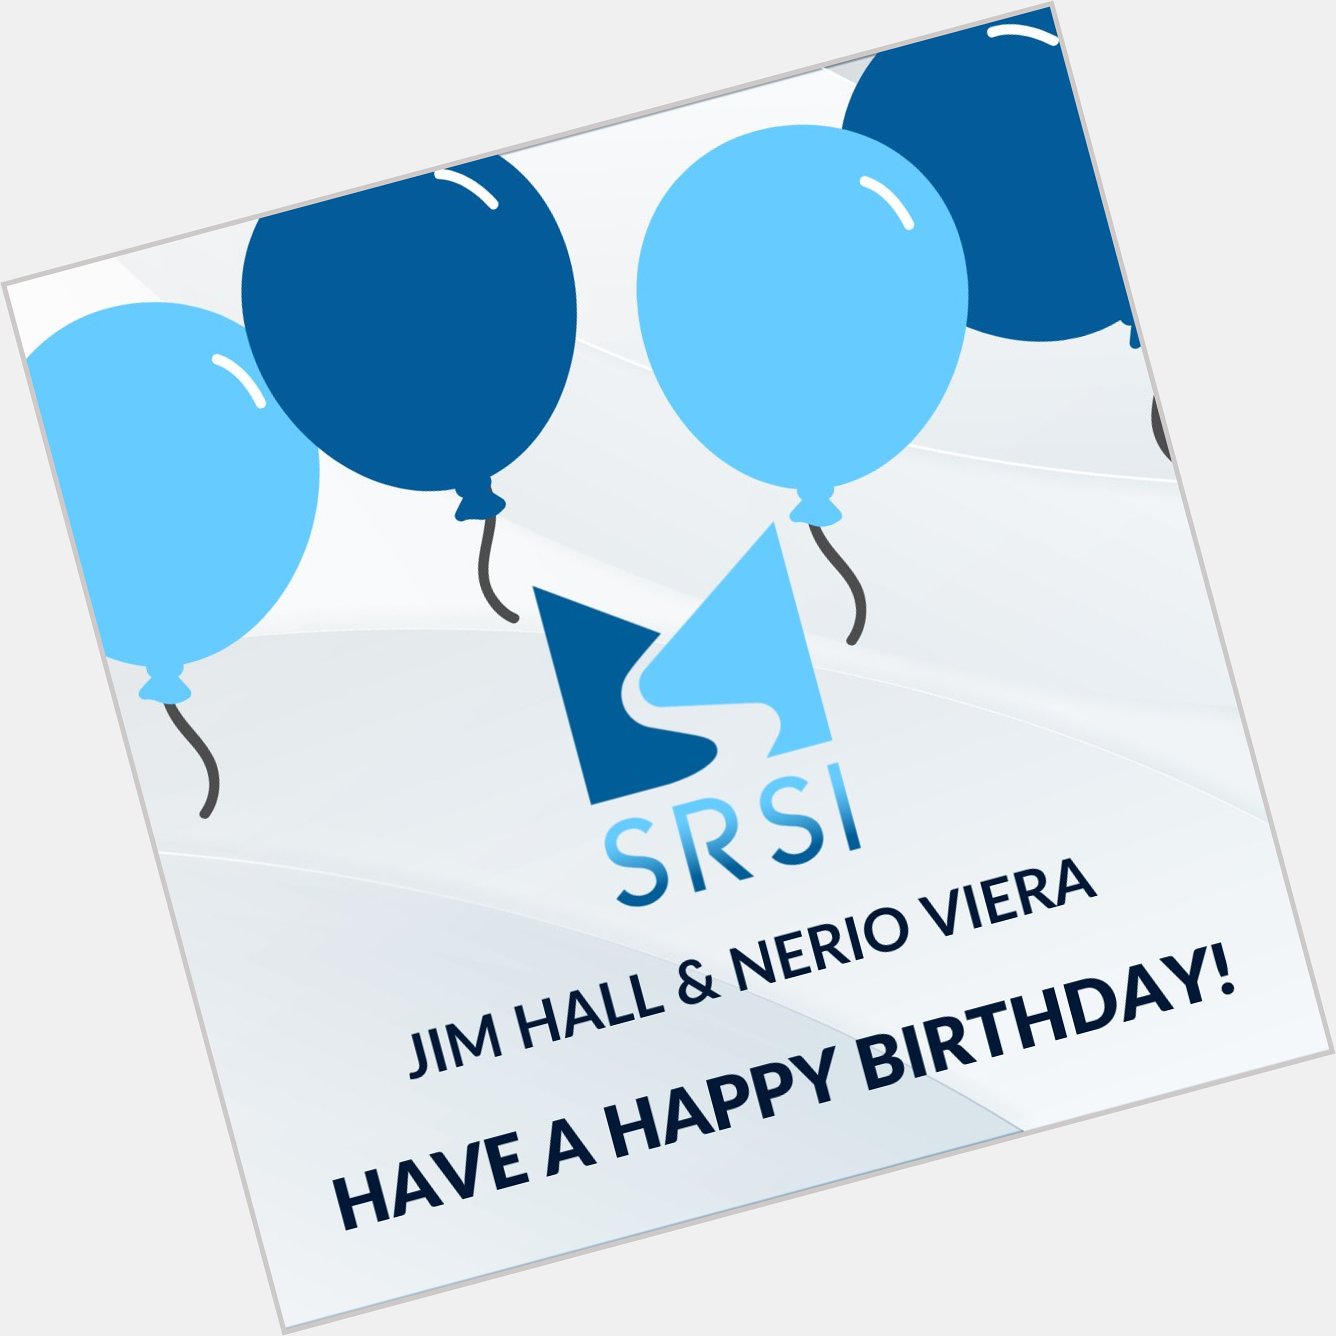 Shoutout to our December Birthdays: Jim Hall and Nerio Viera! We hope you have a very happy birthday.   